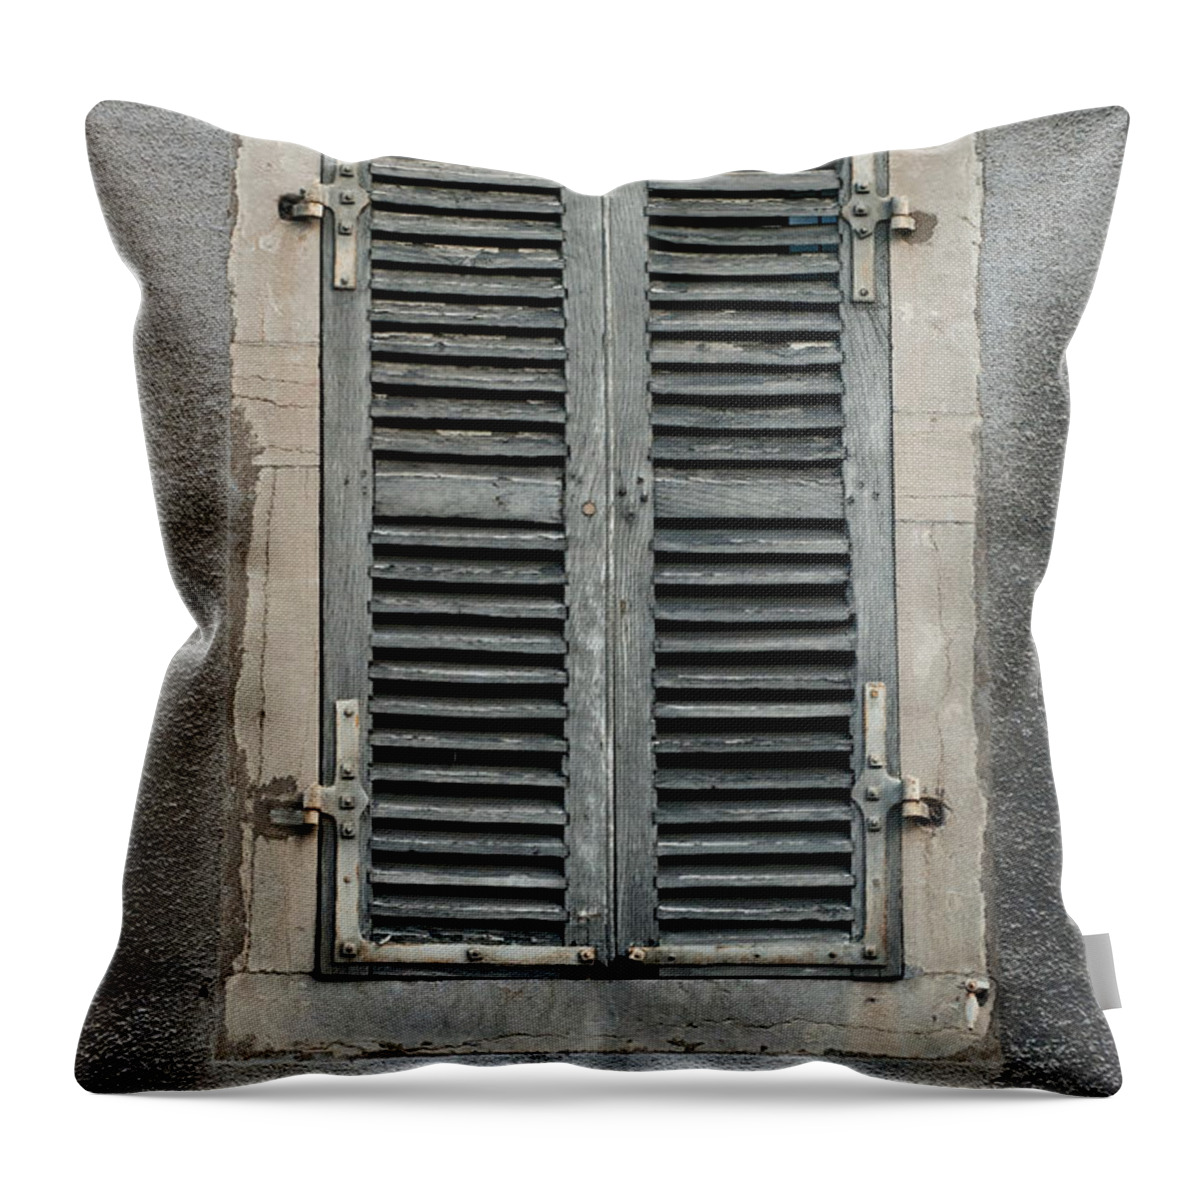 Rustic Throw Pillow featuring the photograph Rustic French Window Shutters Vignette 1 by Jani Freimann